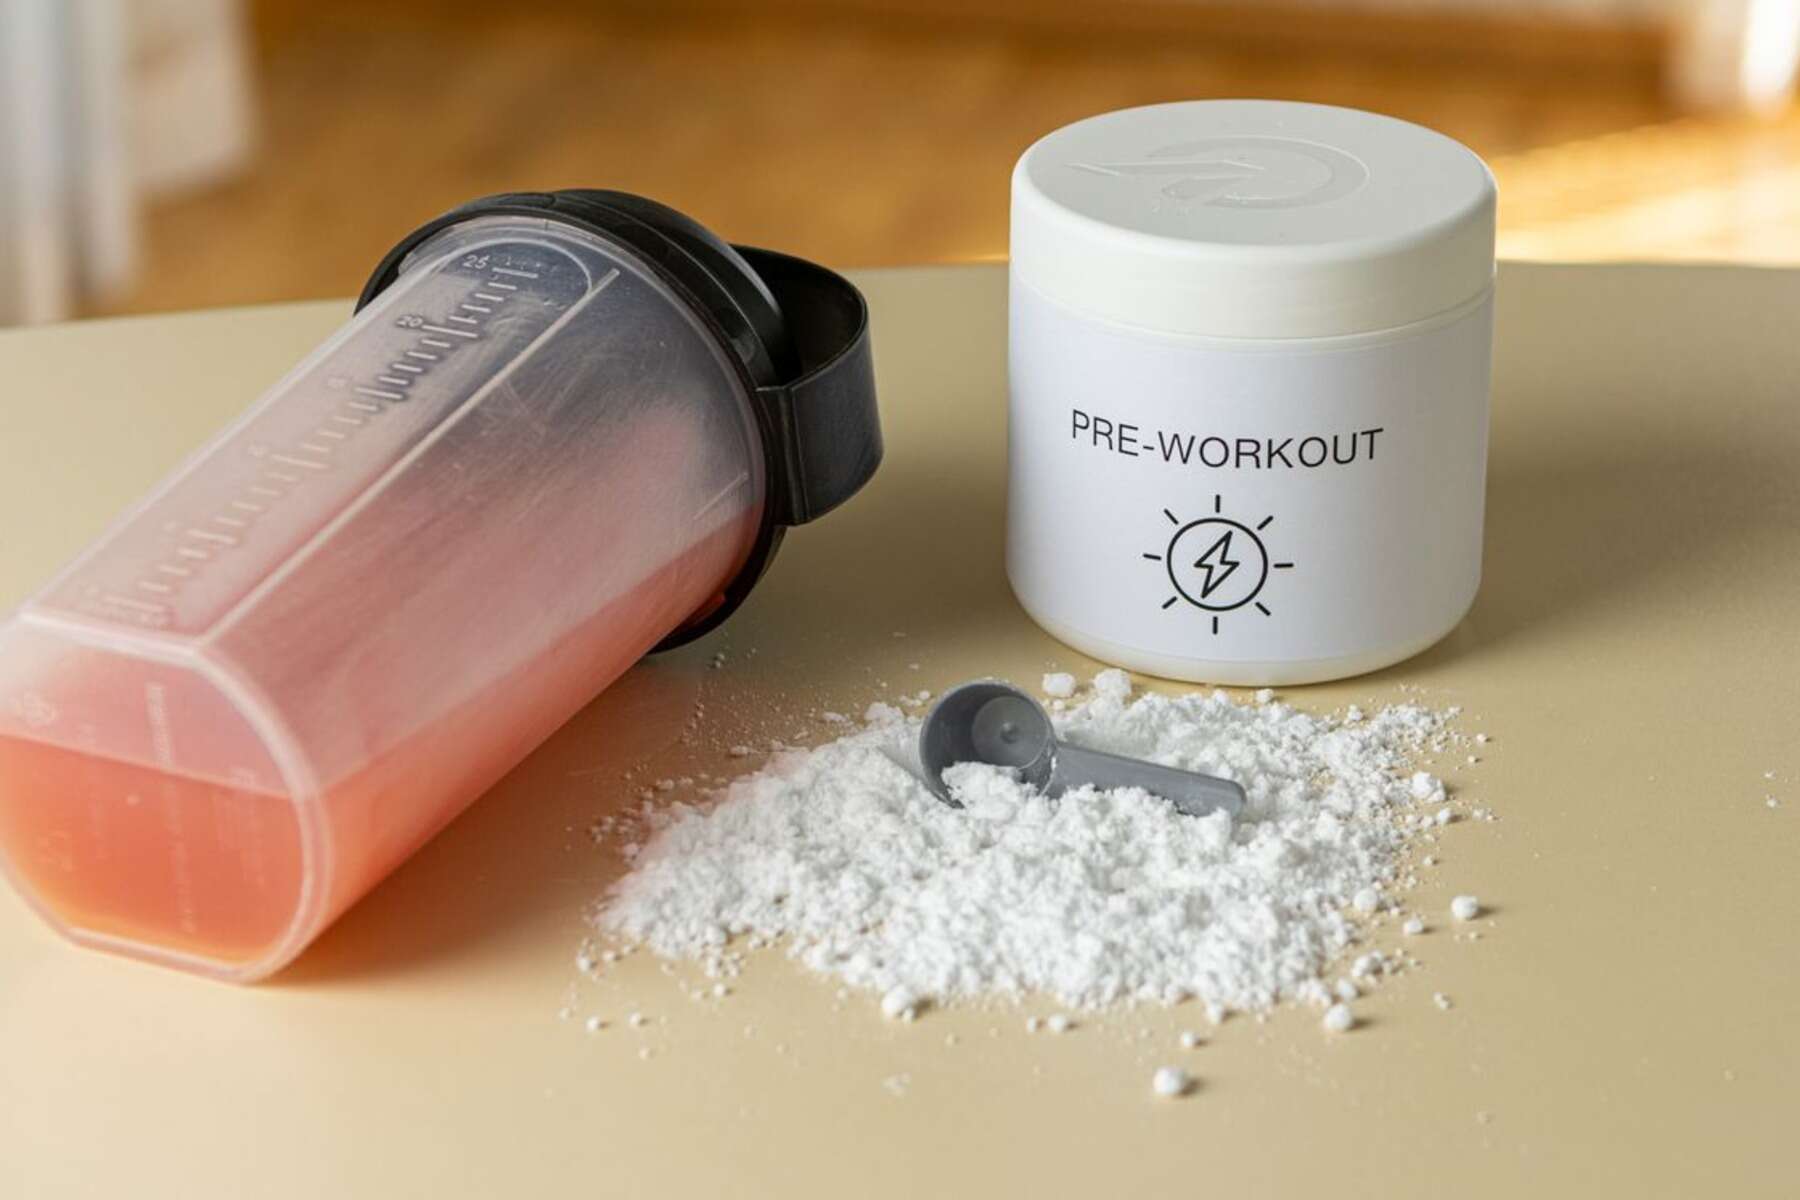 Scoop of white pre-workout powder scattered on a table beside a bottle of pre-workout supplement and water tumbler